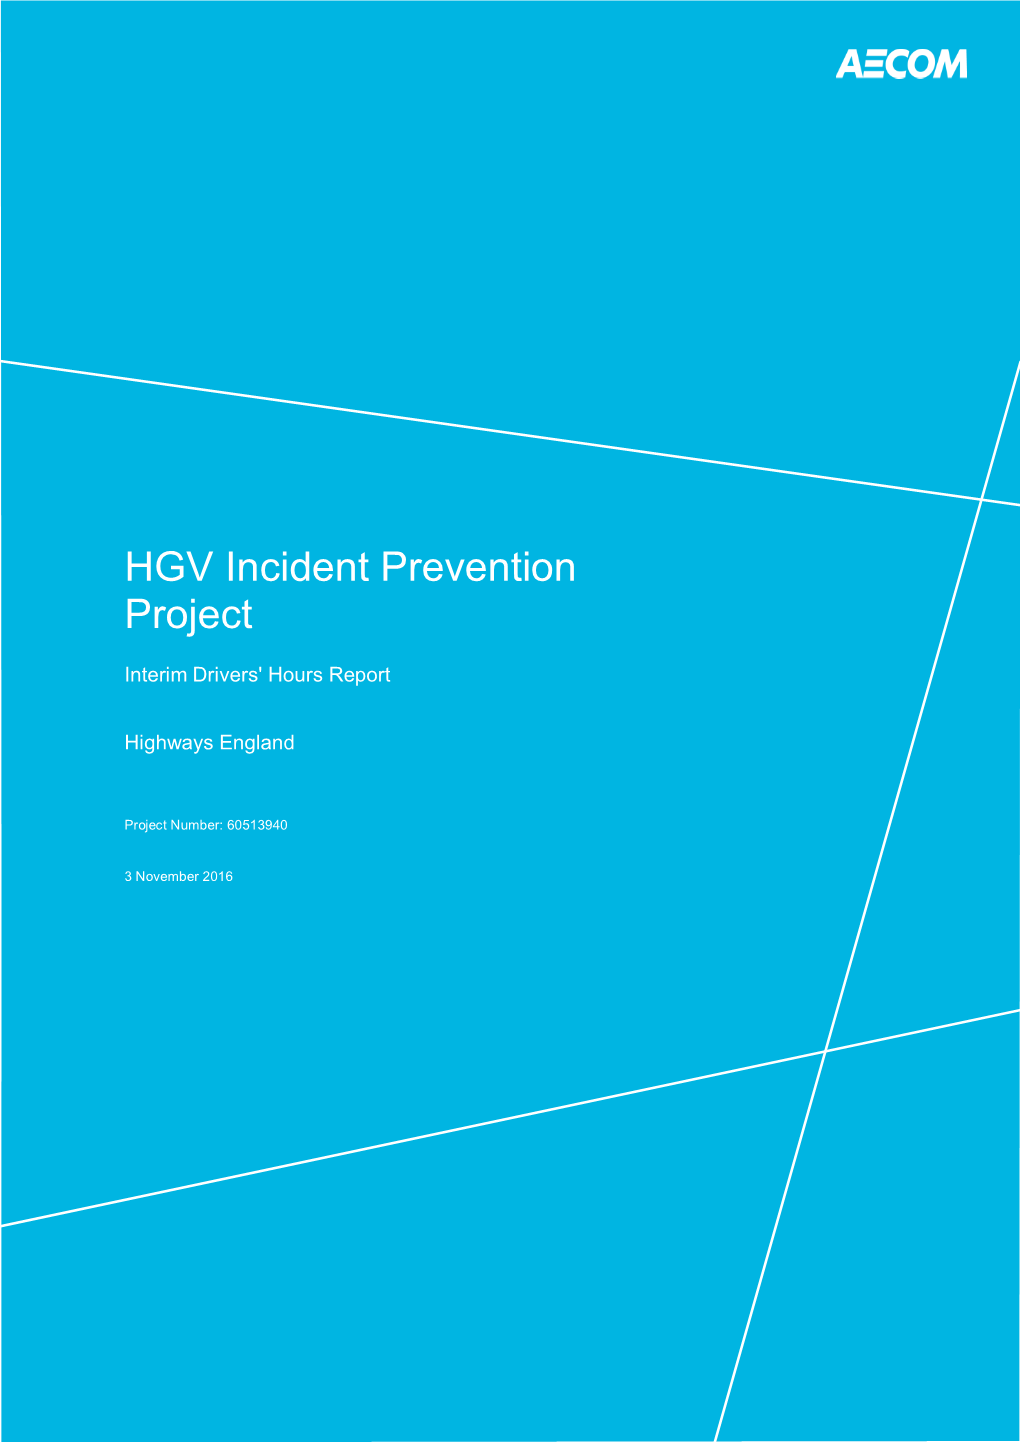 James Mayes Report HGV Incident Prevention Project 2016-11-03